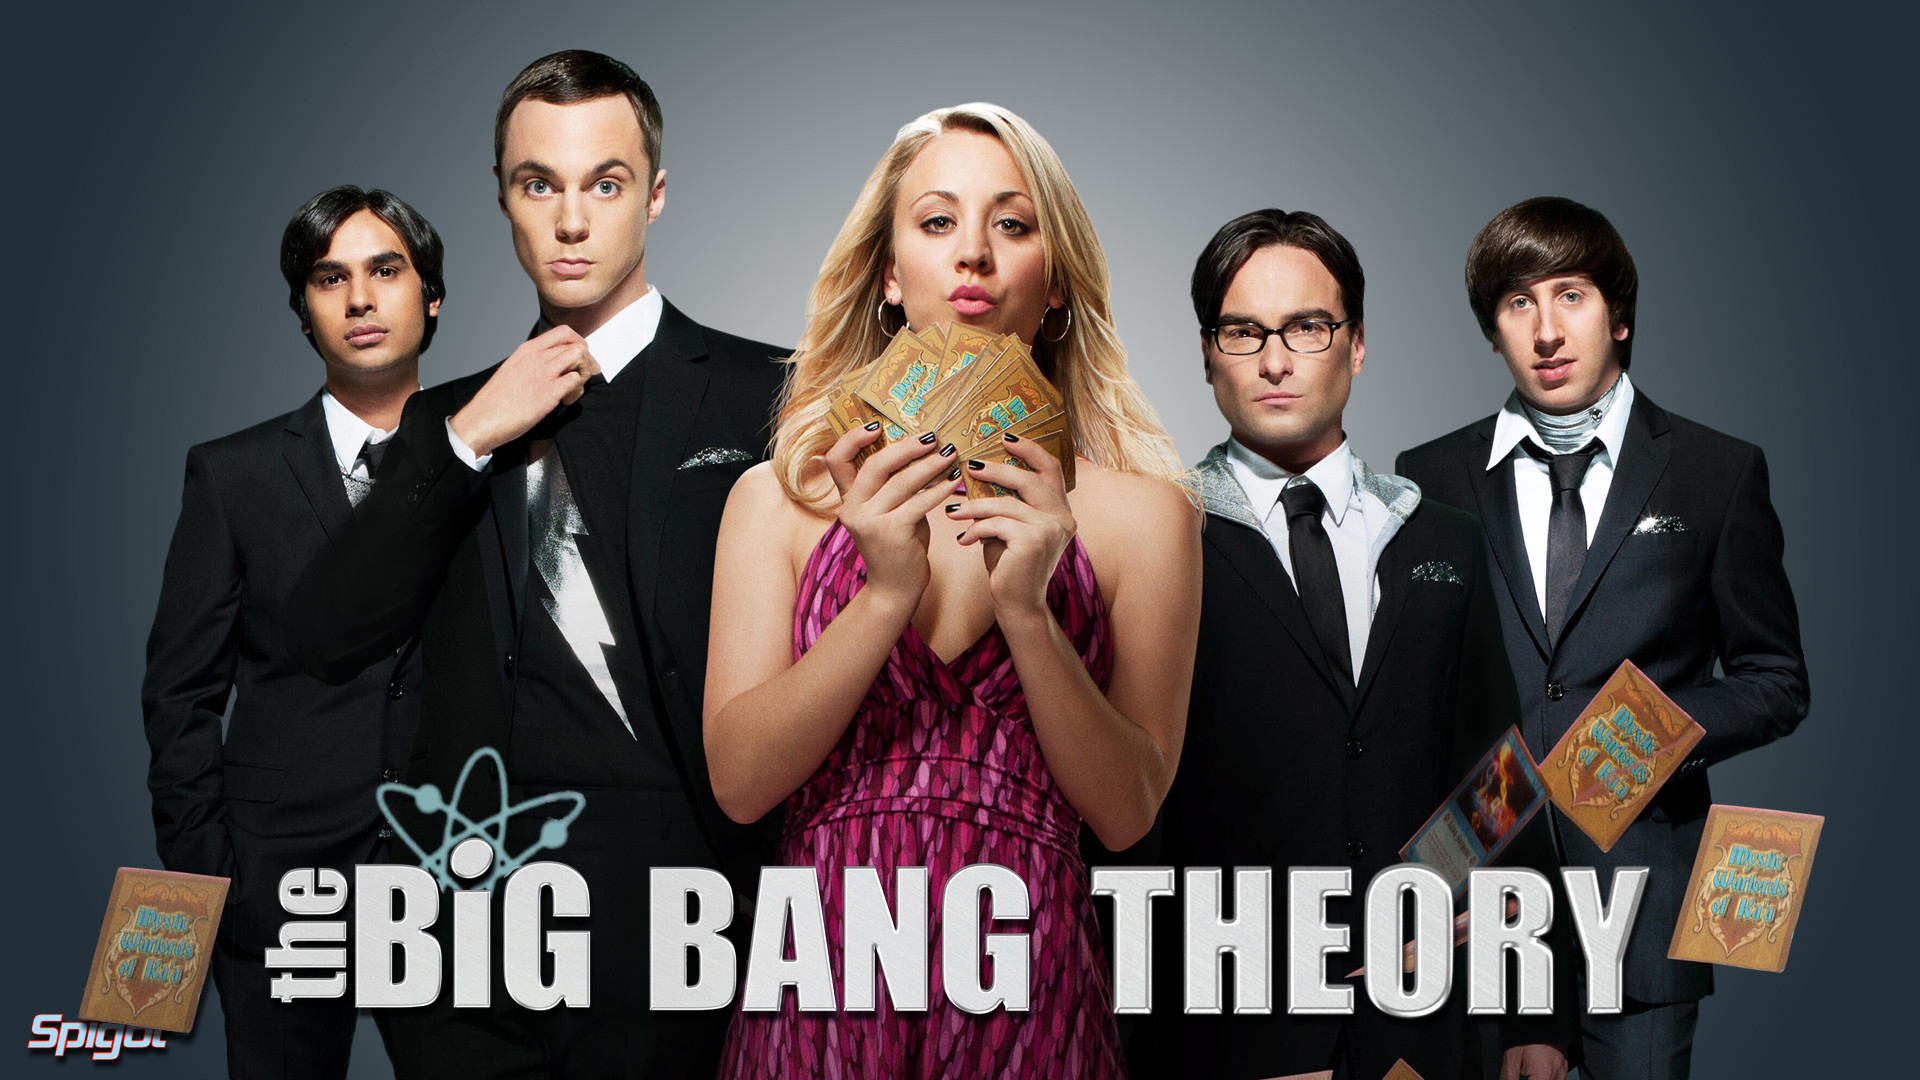 1920x1080 Two more wallpapers of this awesome show The Big Bang Theory.